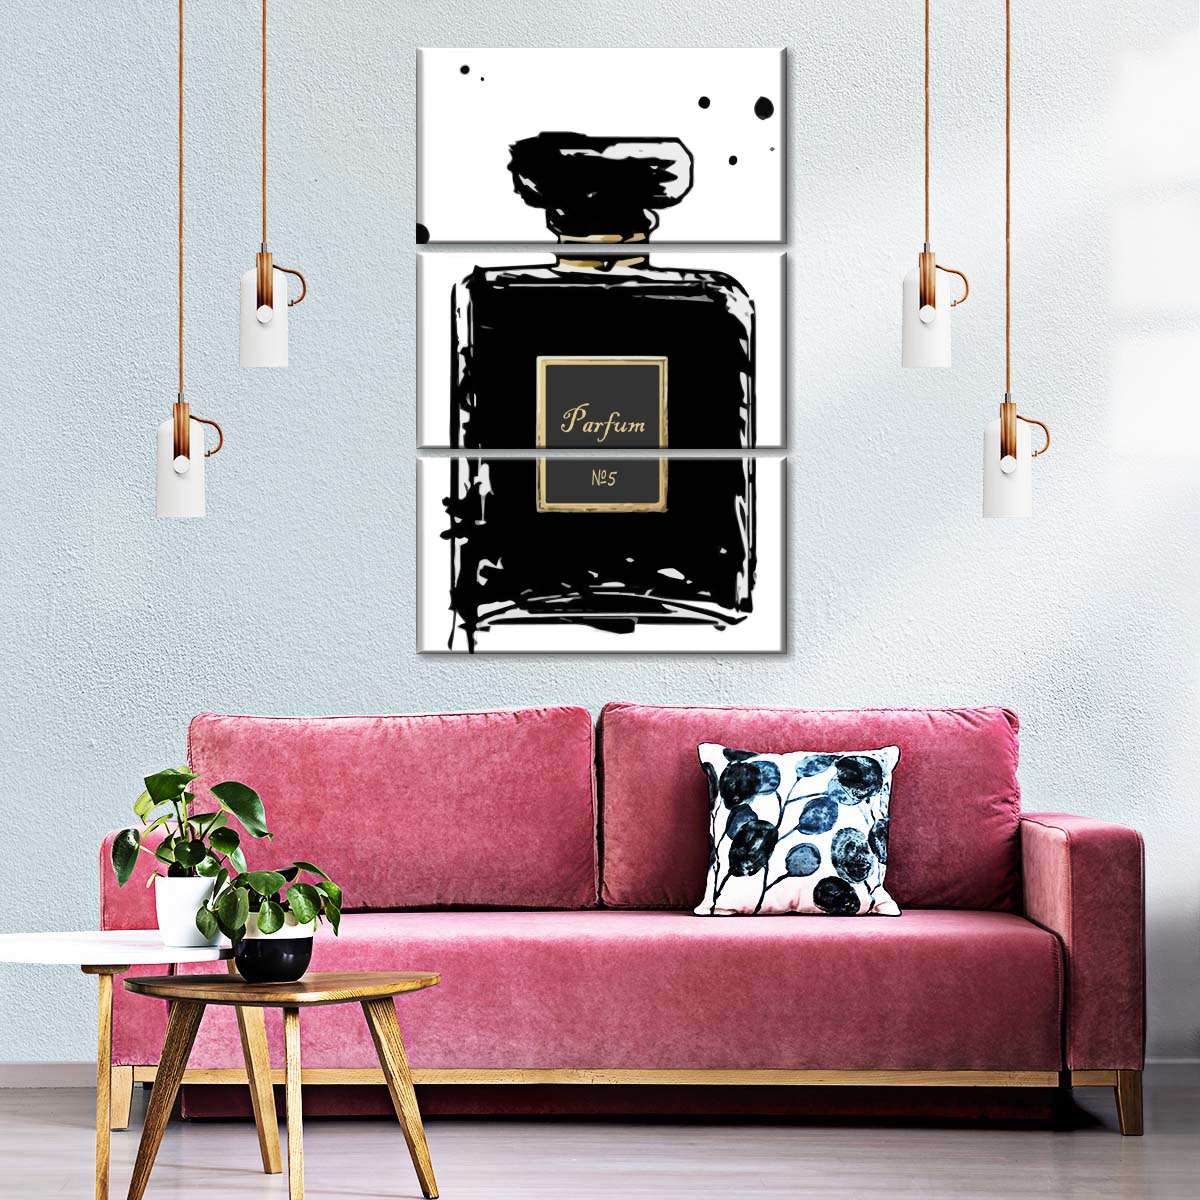 Canvas Wall Art Glam Perfume Chanel Pictures Wall  